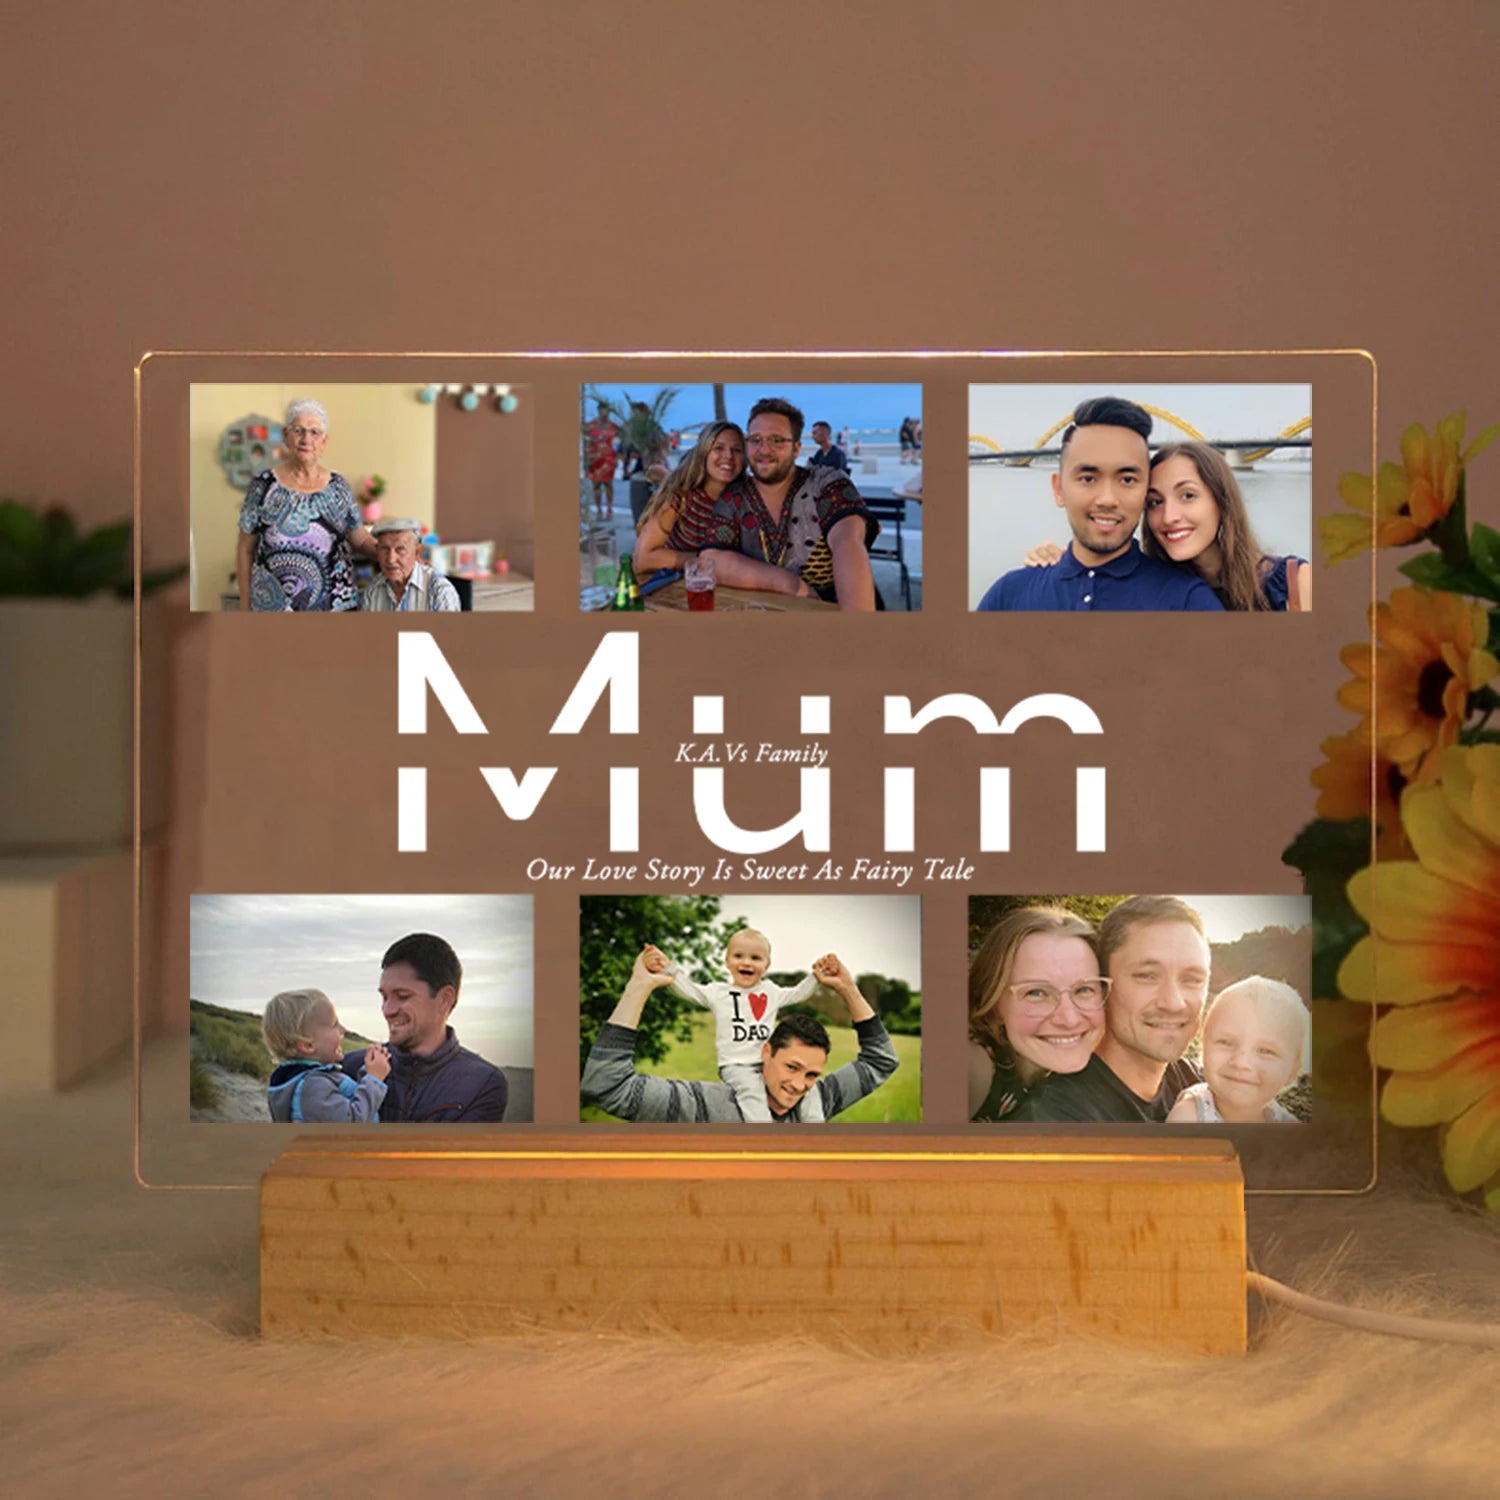 Personalized Acrylic Lamp with Custom Photo and Text - Ideal Bedroom Night Light for MOM DAD LOVE Friend Family Day Wedding Birthday Gift Present Mum / Warm Light